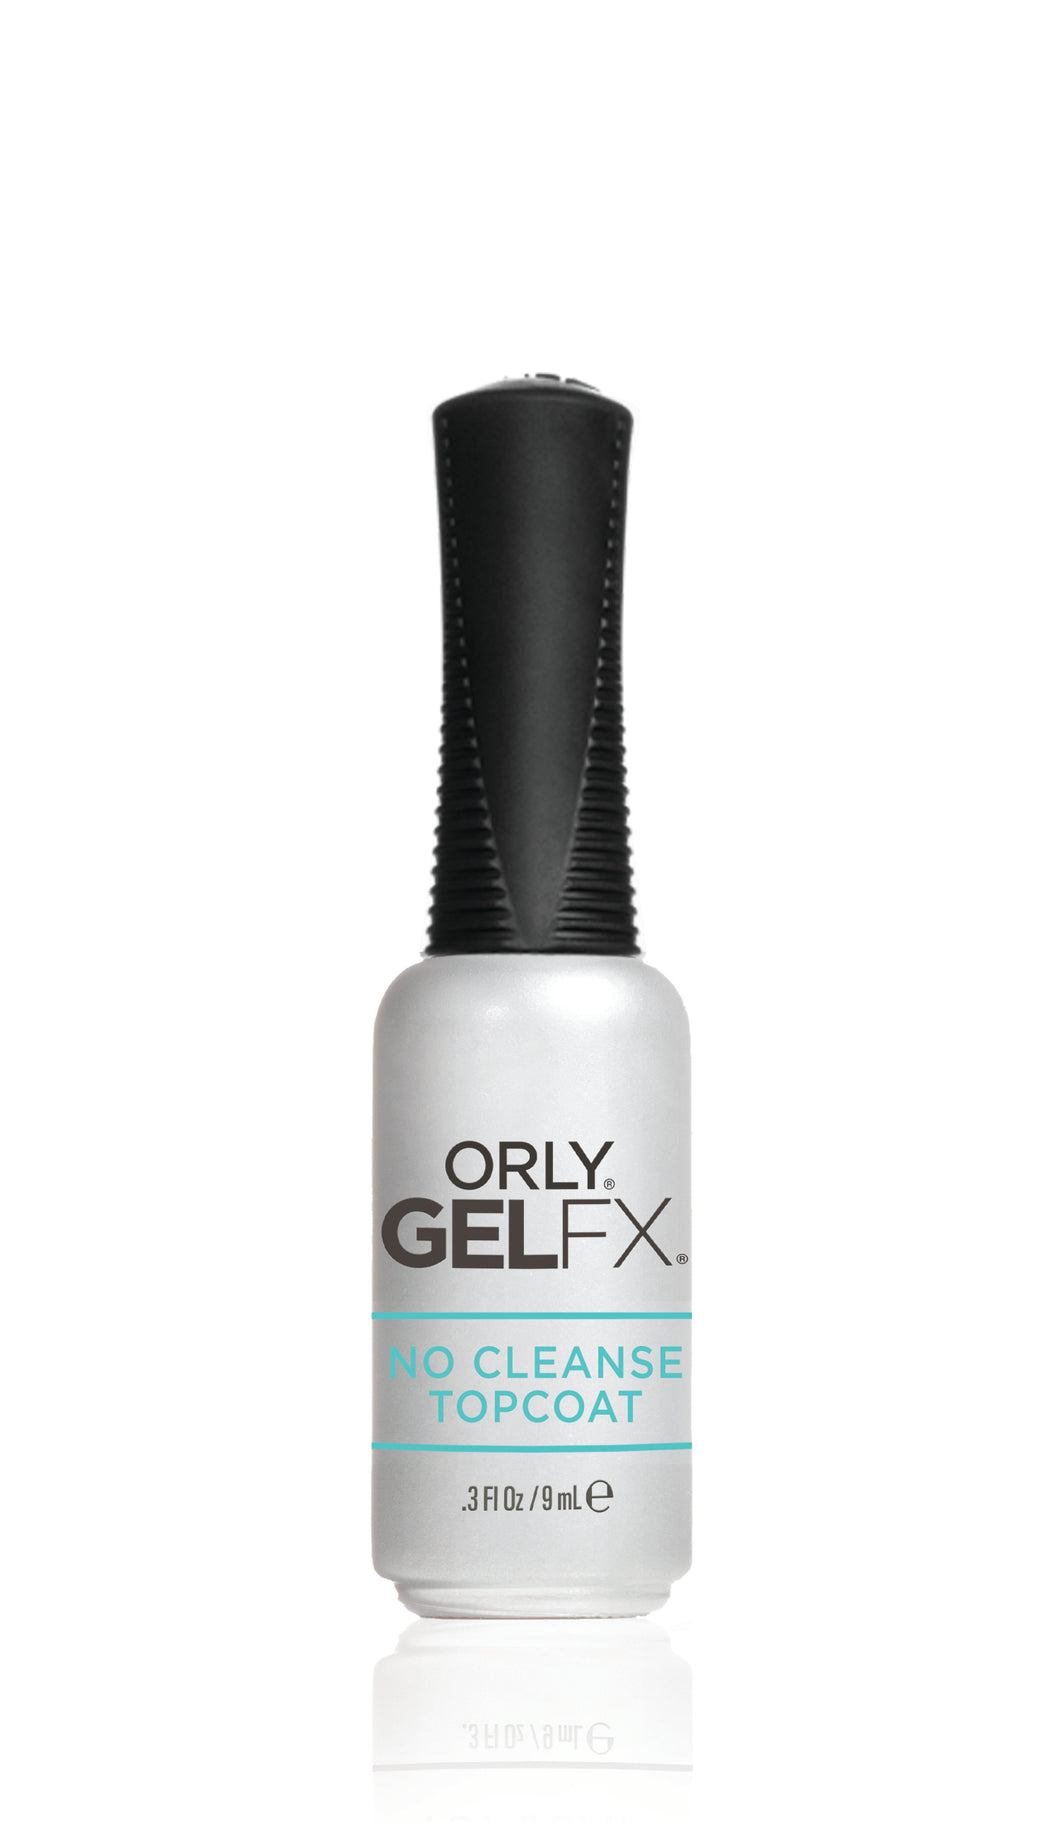 Orly GELFX - No Cleanse Topcoat